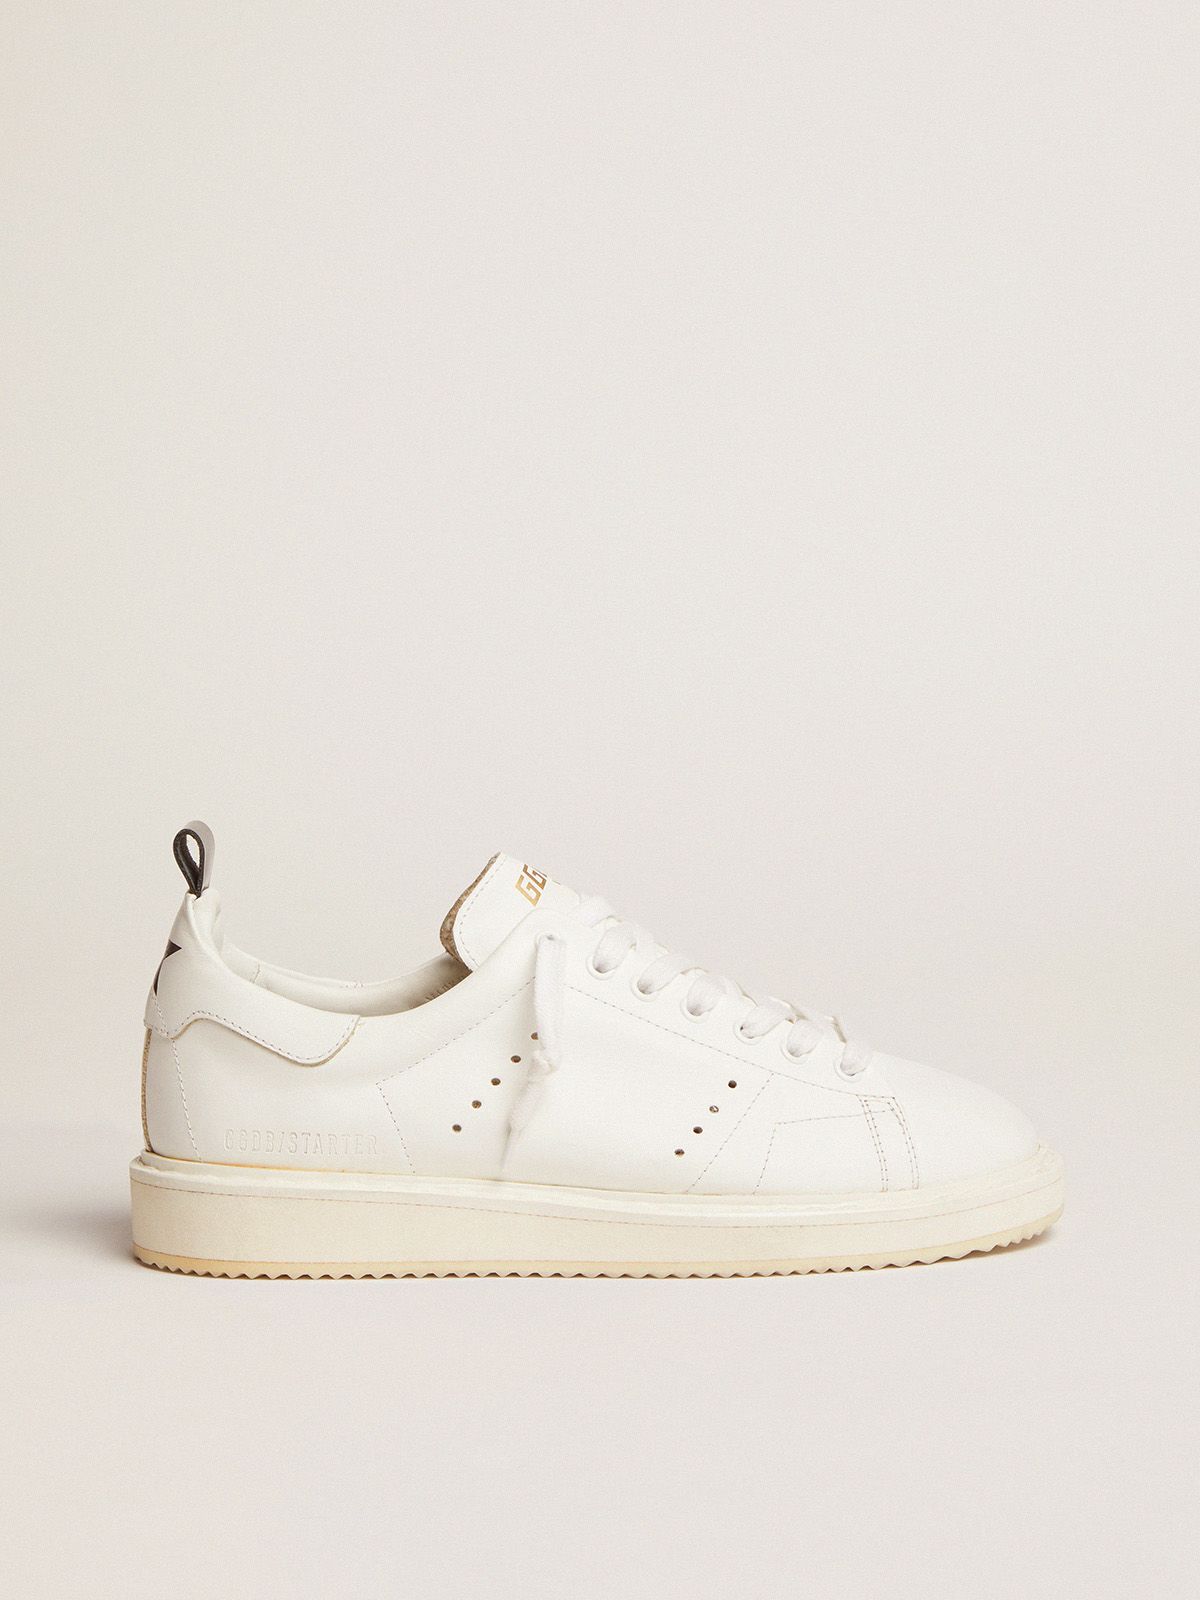 golden goose in white Starter sneakers leather total